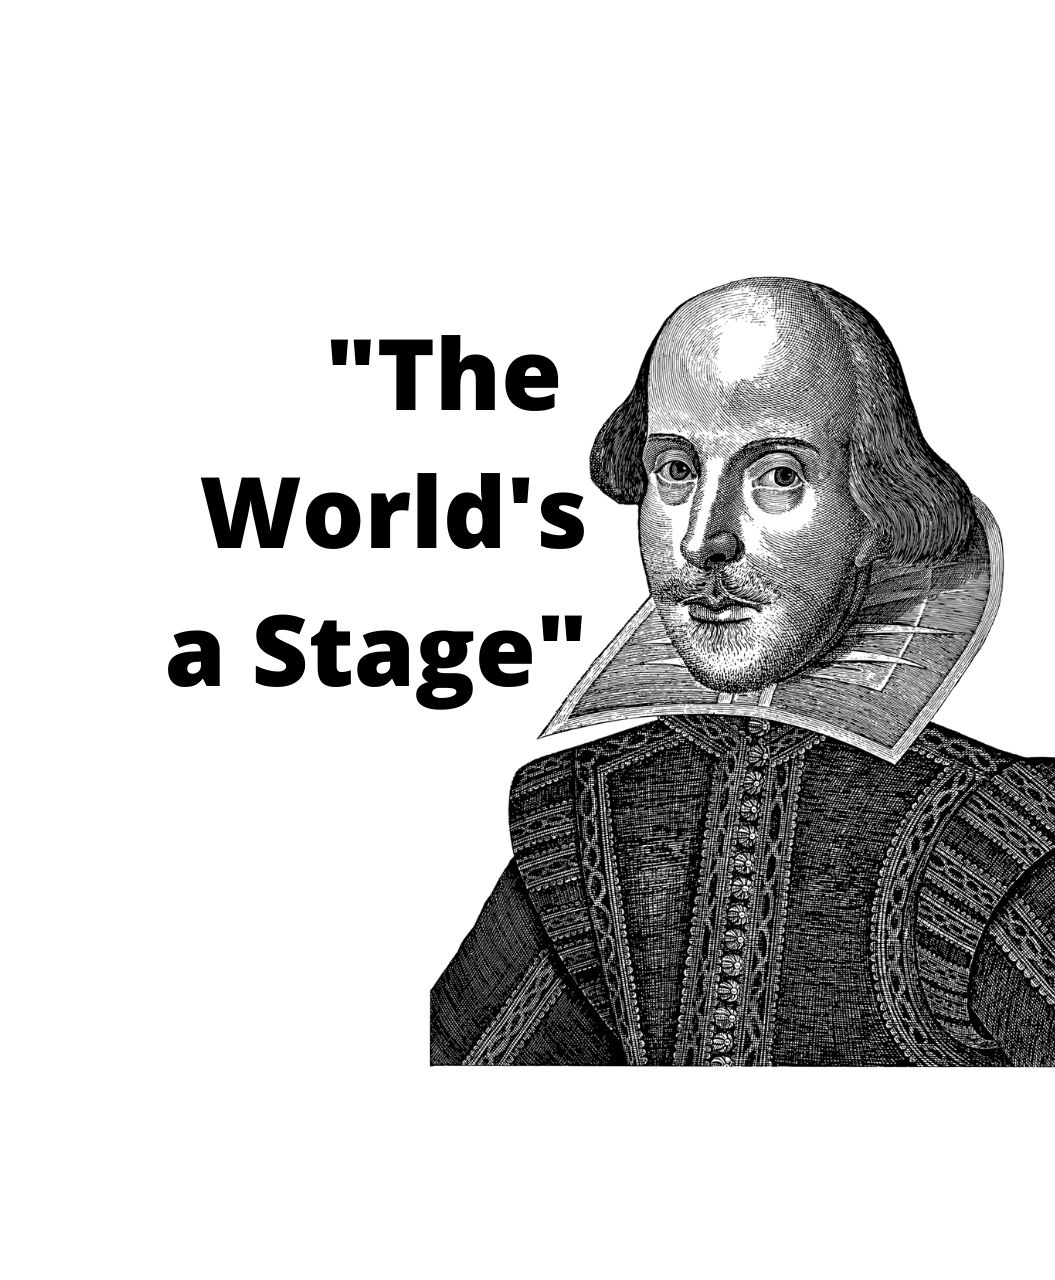 Example of what is a metaphor: Shakespear's "The world's a stage"